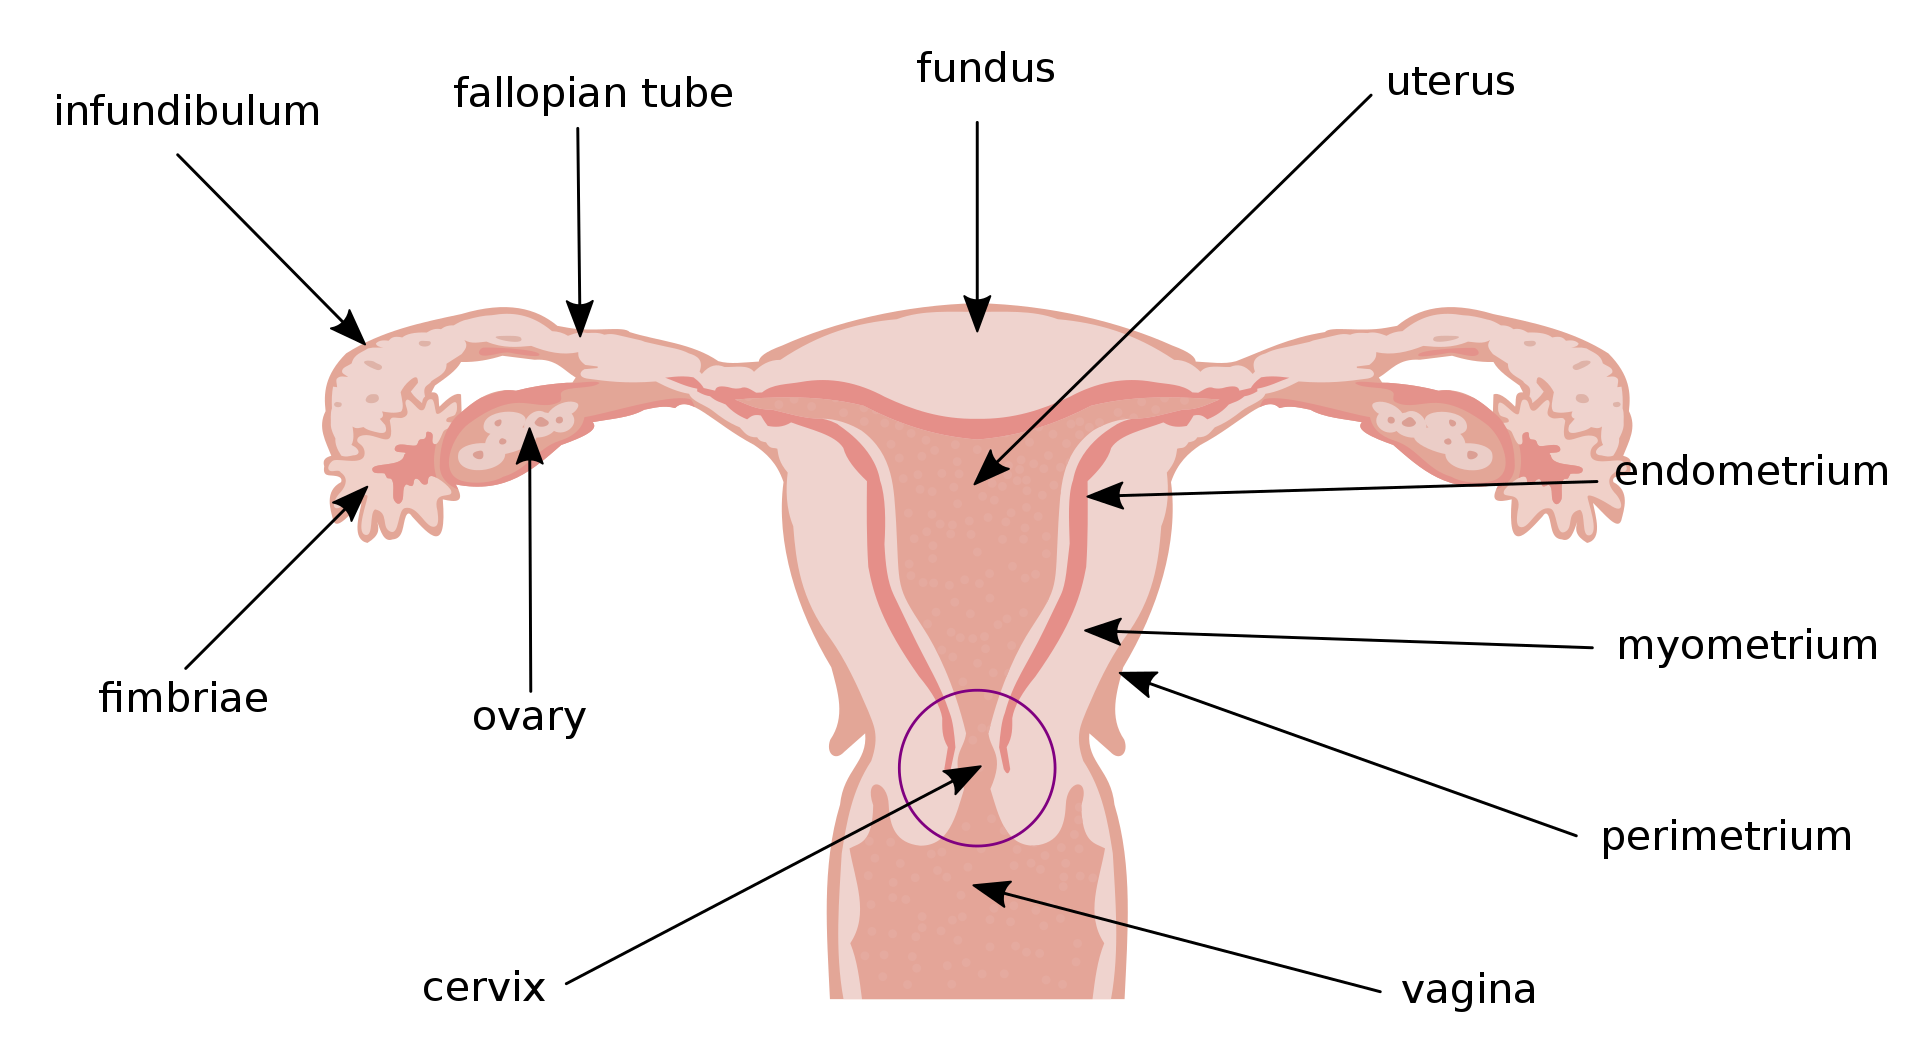 Common Conditions That Can Affect the Uterus